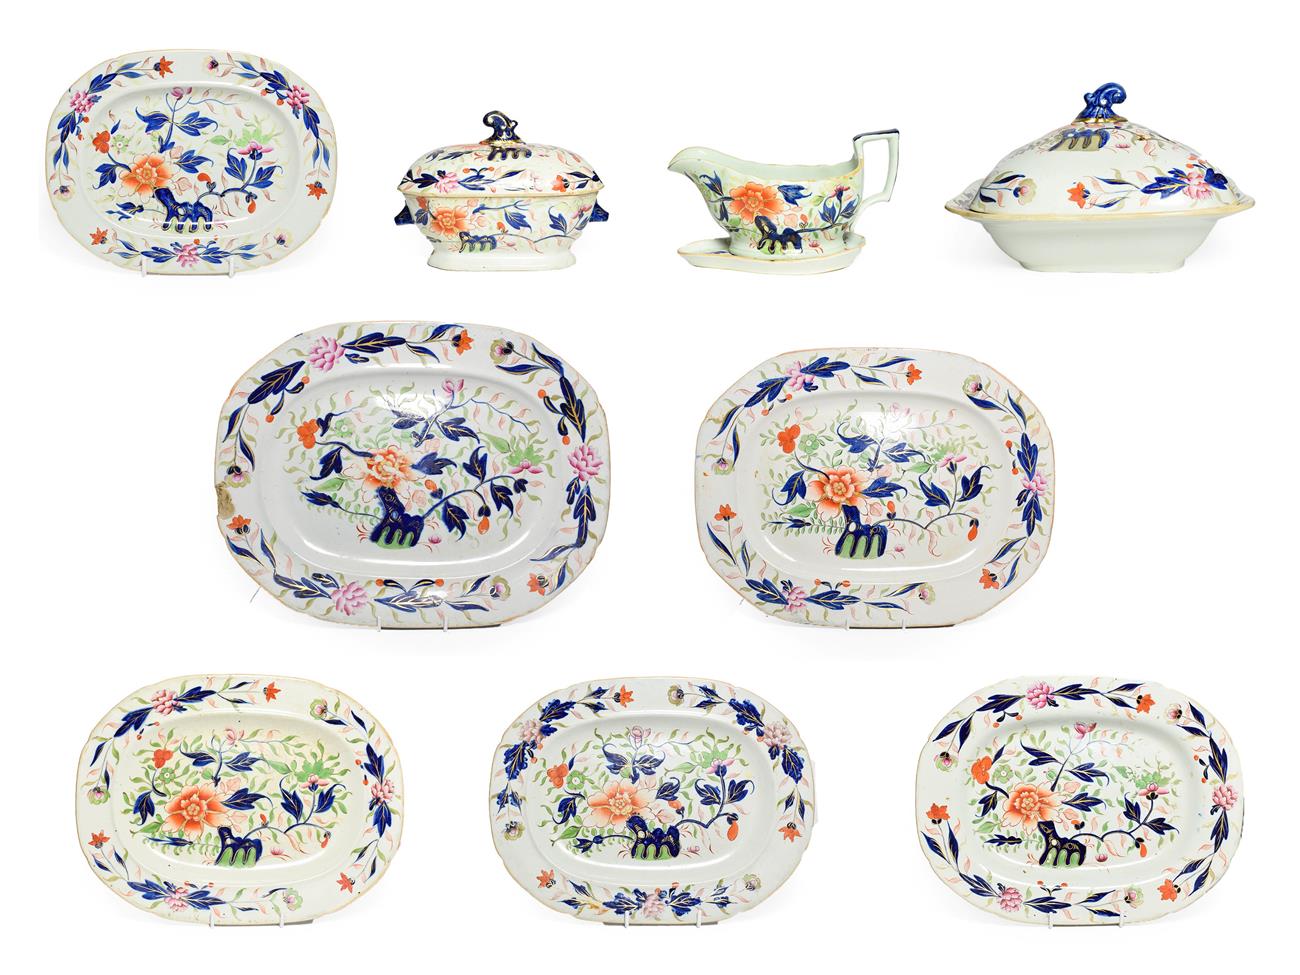 Lot 68 - A Staffordshire Ironstone Dinner Service, circa 1840, transfer printed and painted with Imari...